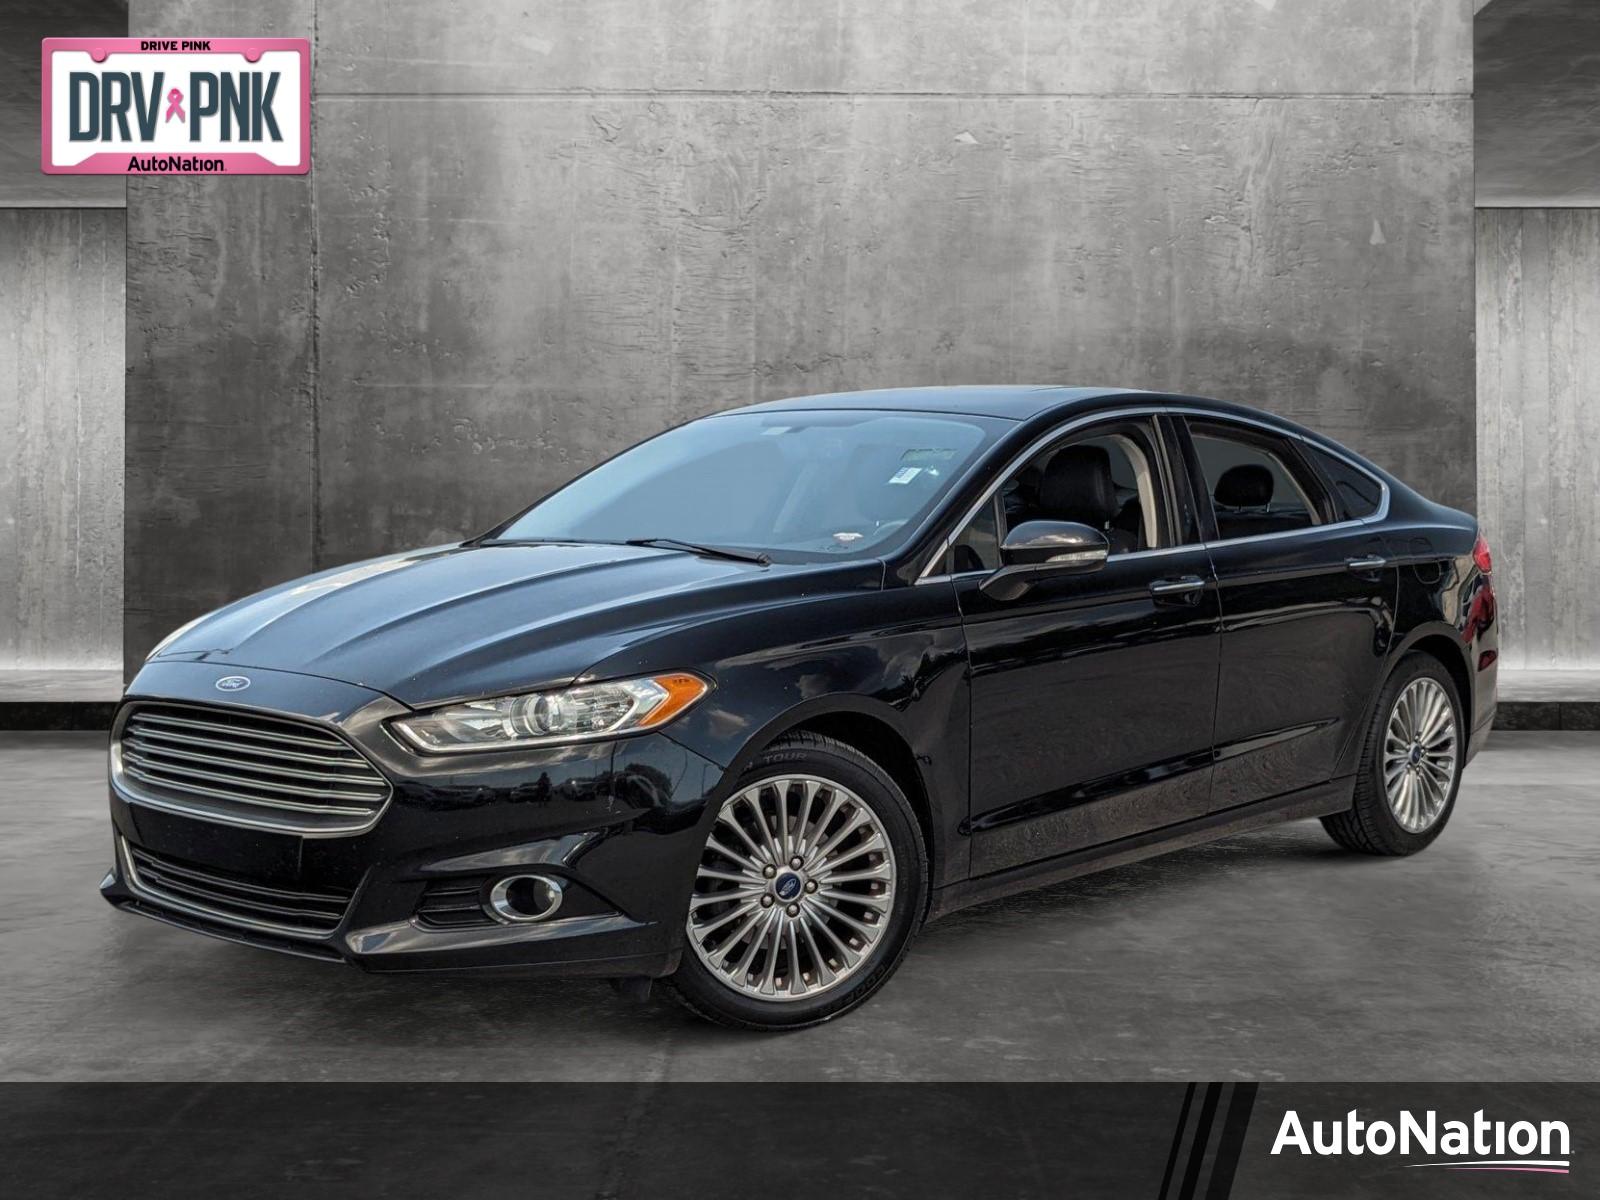 2016 Ford Fusion Vehicle Photo in St. Petersburg, FL 33713